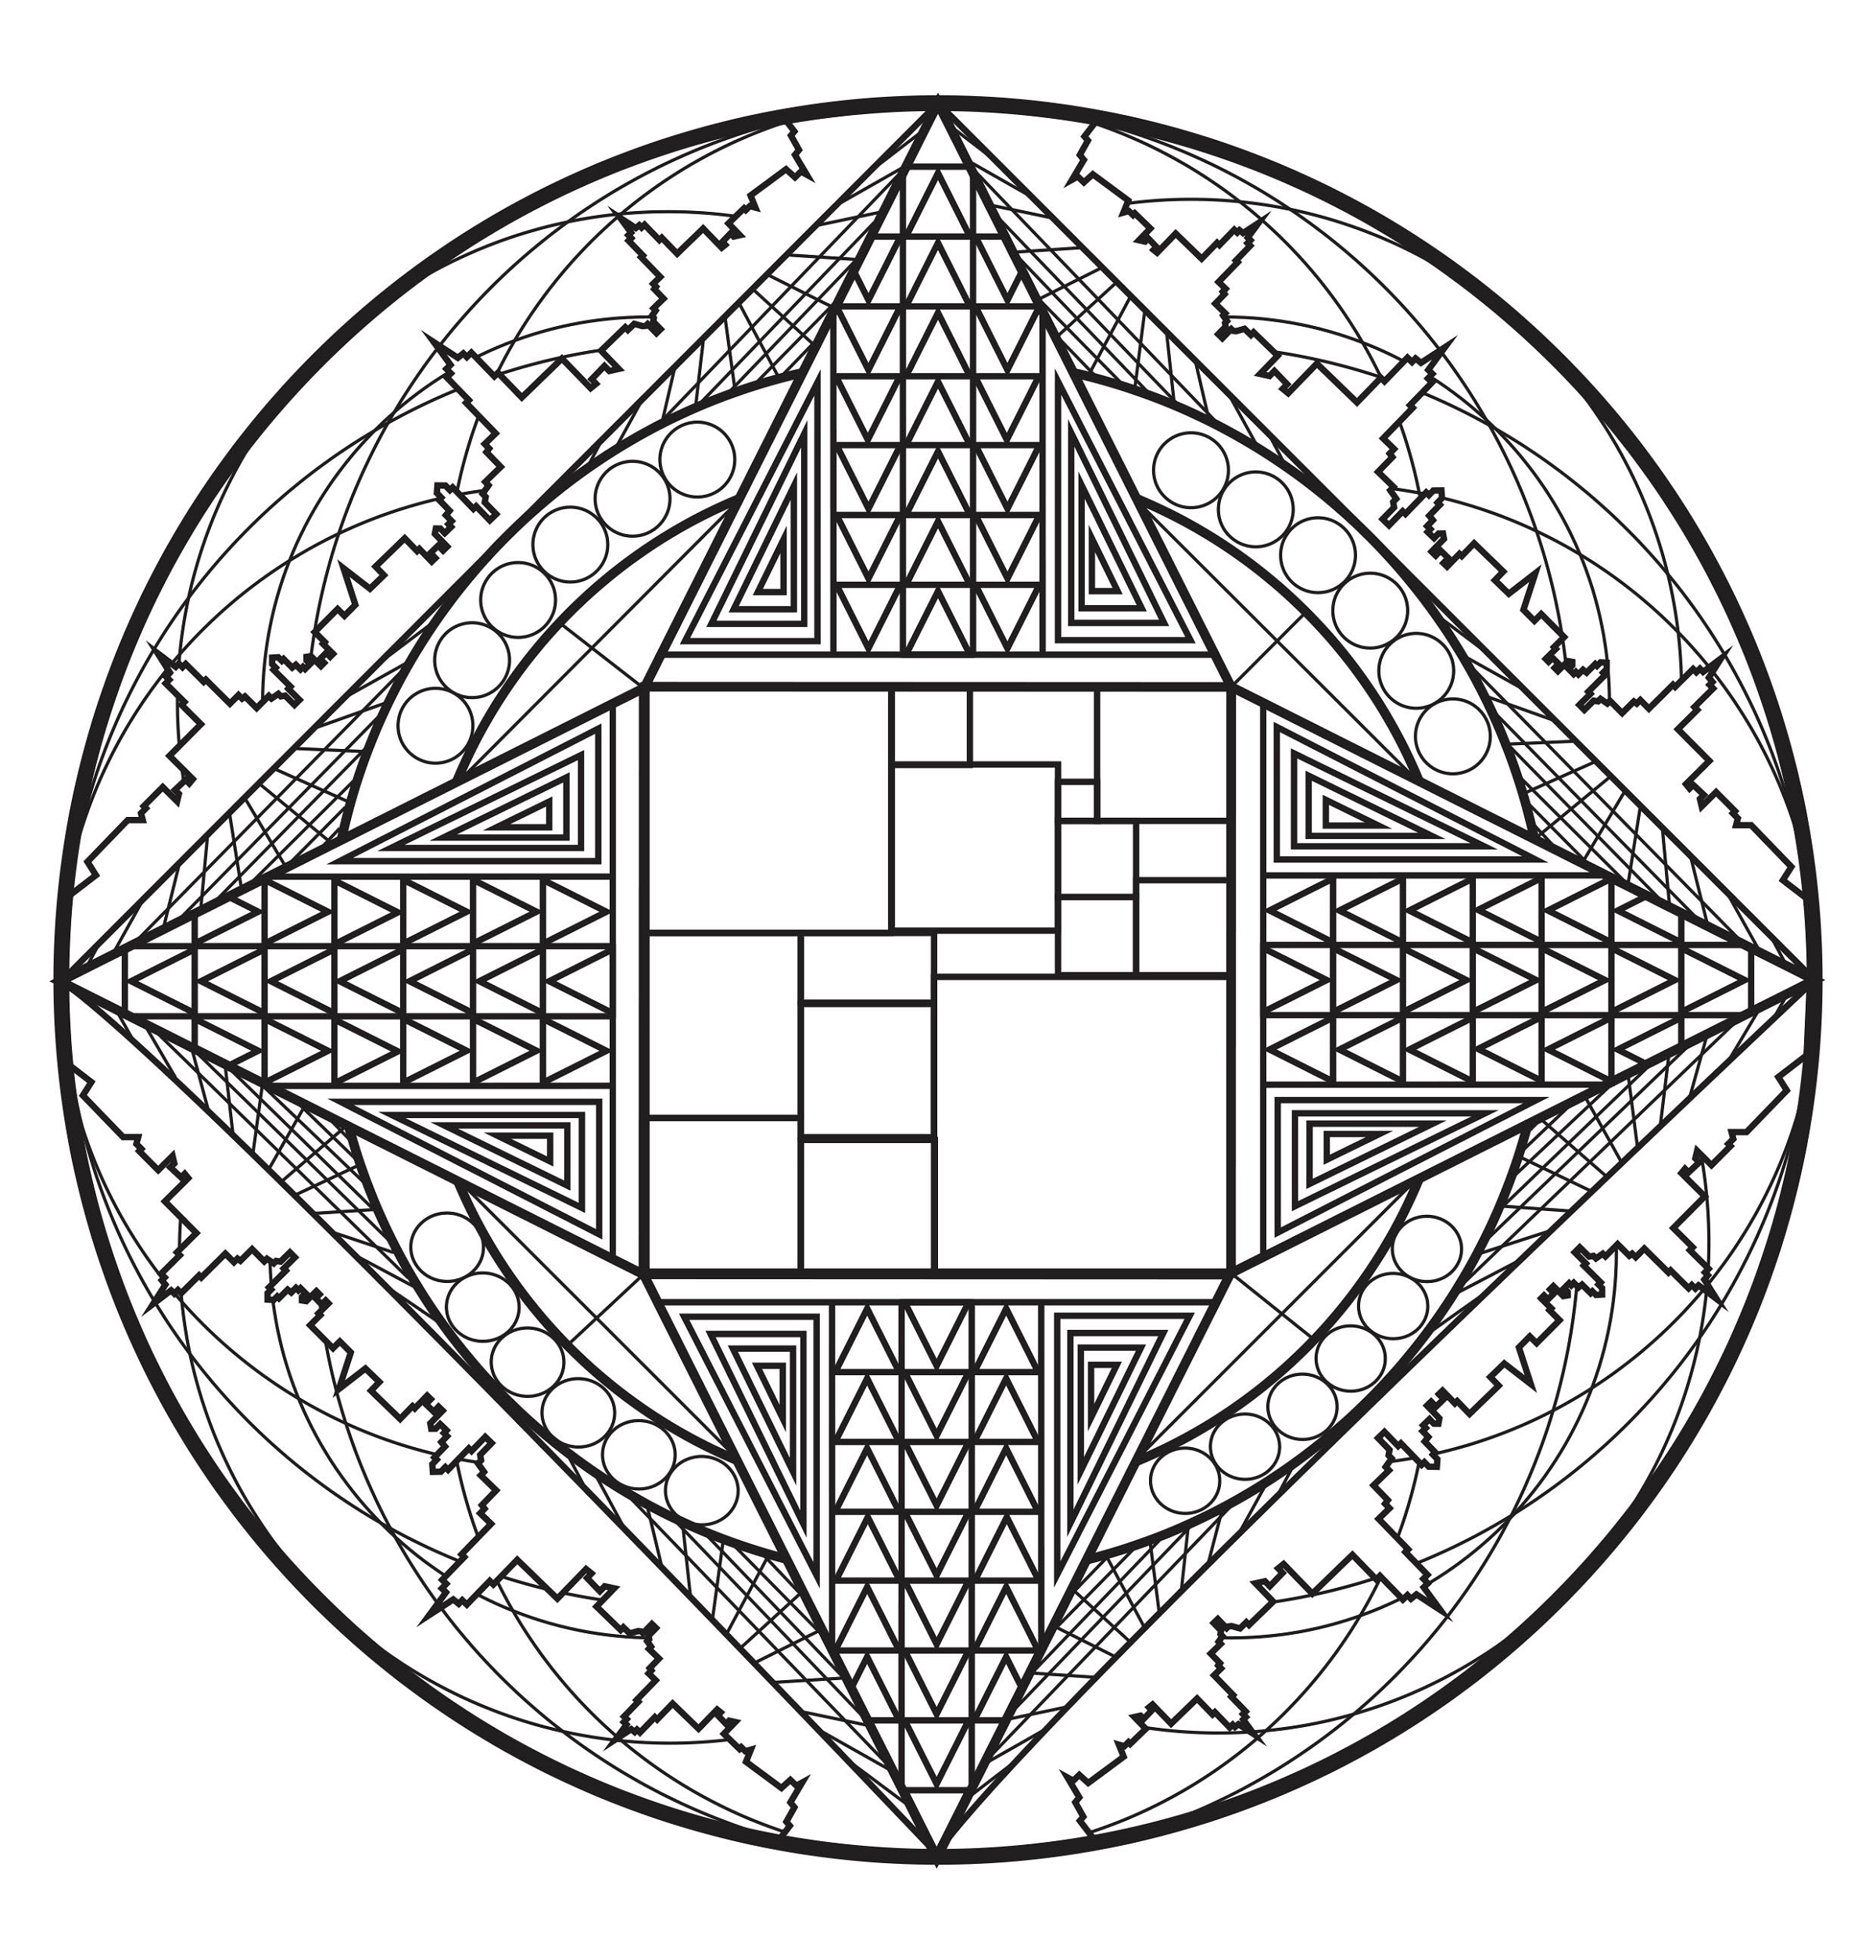 Mandala Coloring Pages Printable for Adults - 101 Coloring